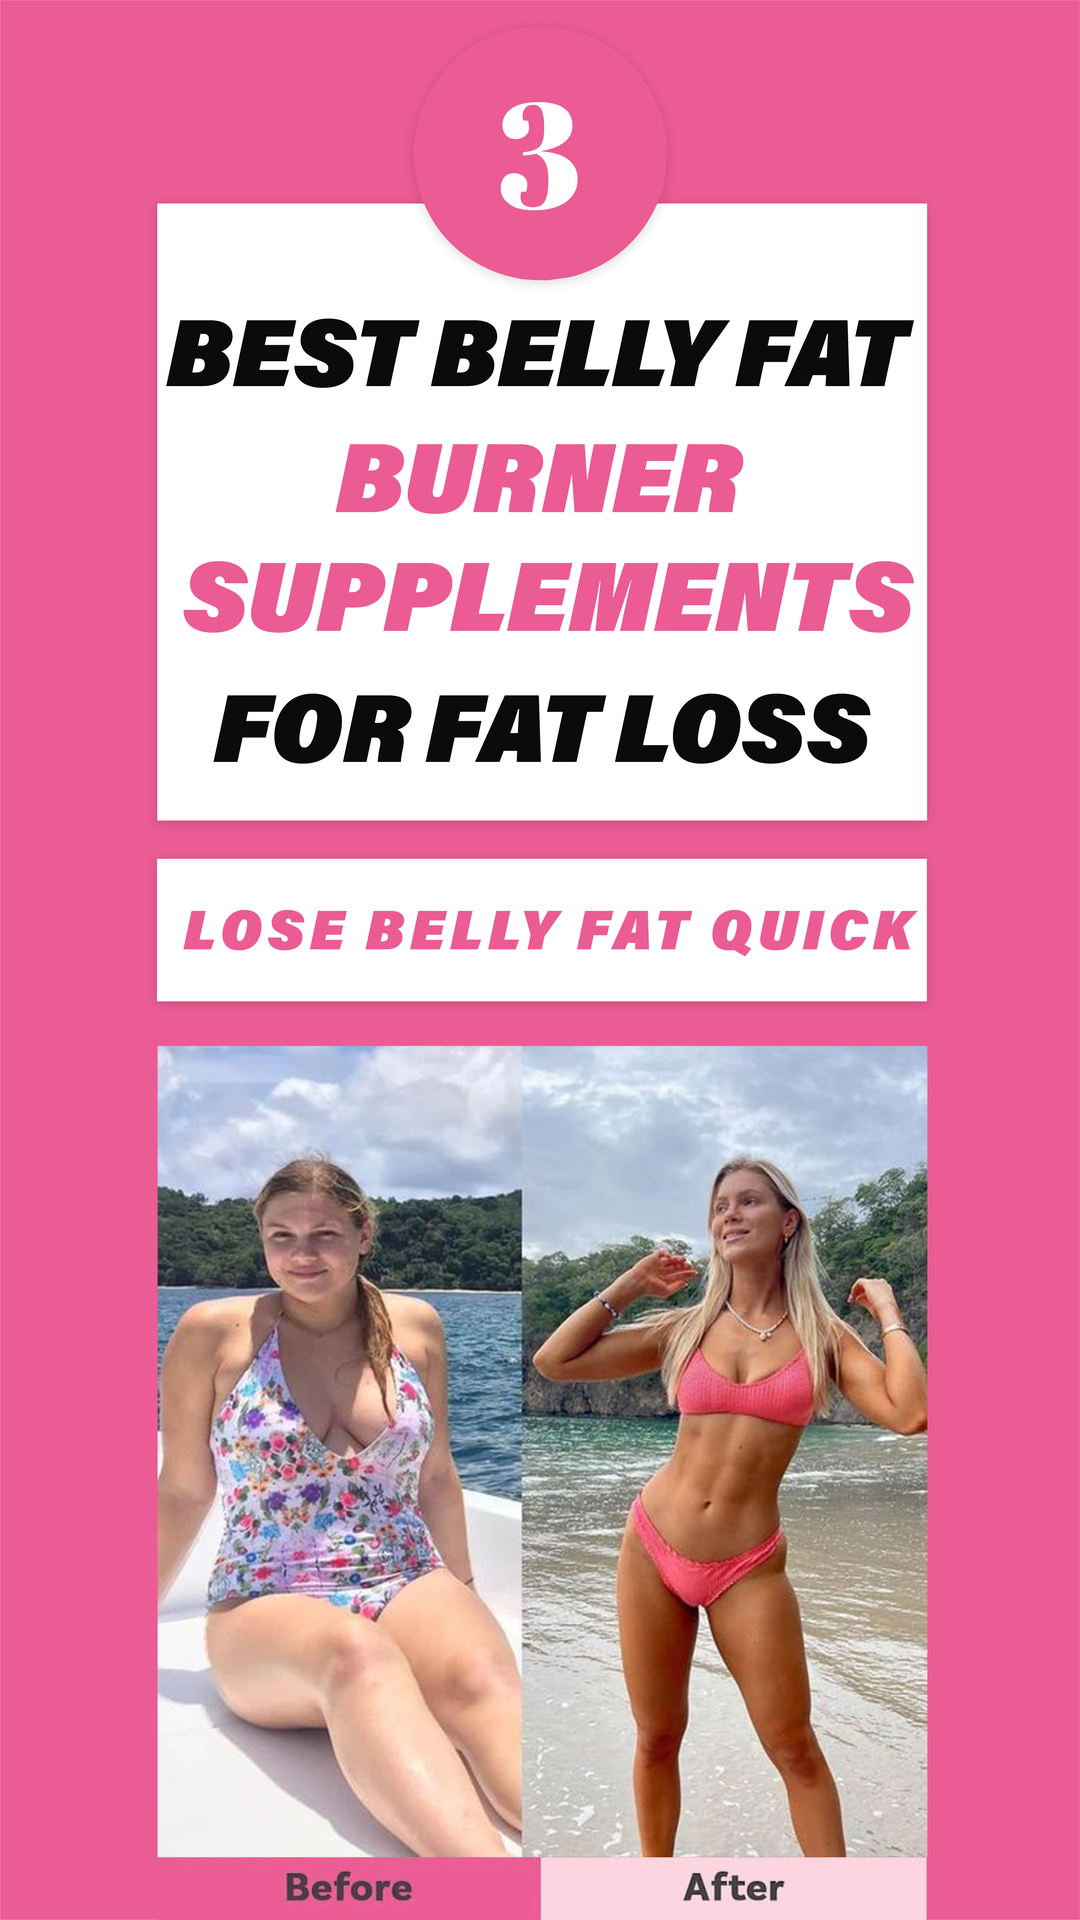 Best Belly Fat Burner Supplements for Fat Loss